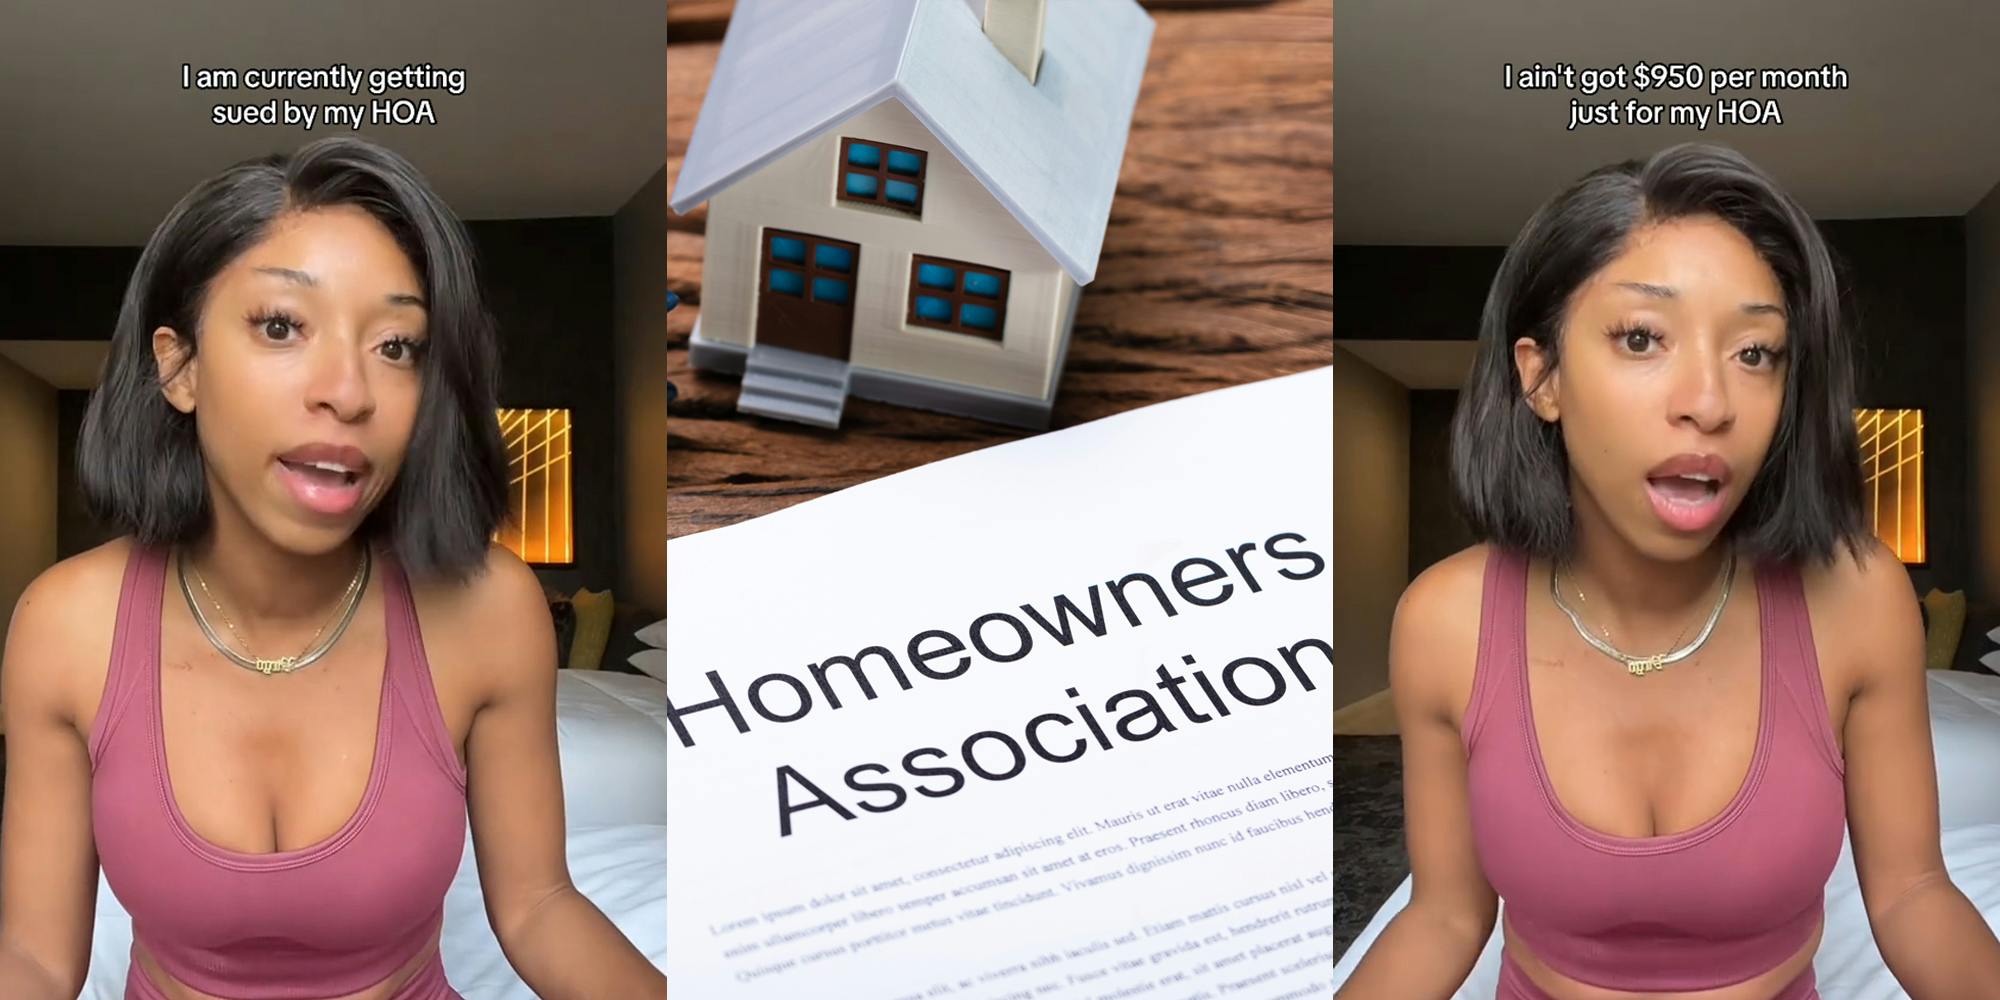 woman speaking with caption "I am currently getting sued by my HOA" (l) Homeowners Association paper on wooden surface with toy house (c) woman speaking with caption "I ain't got $950 per month just for my HOA" (r)